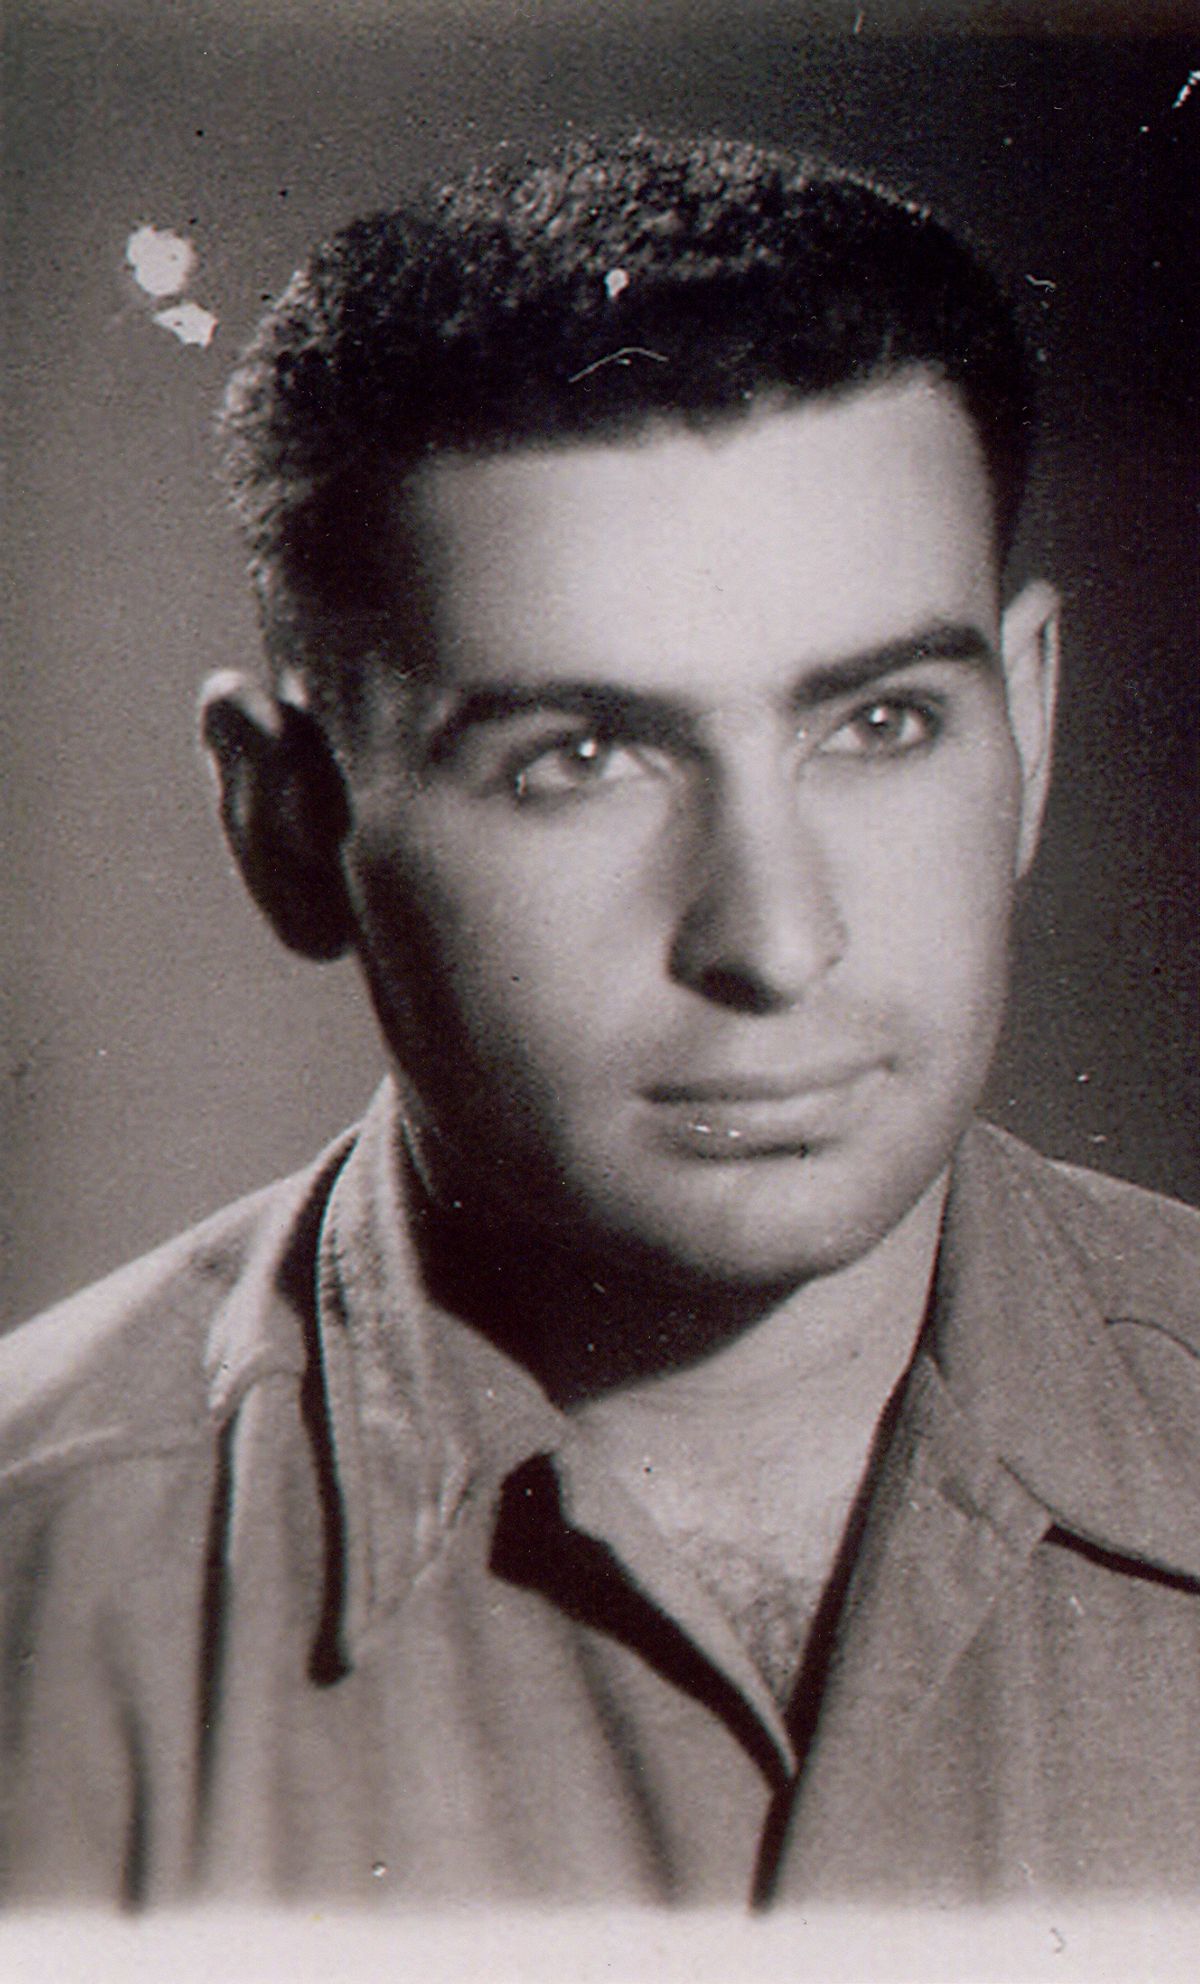 Pfc Richard Barancik during his military service in the Second World War Photo: Monuments Men and Women Foundation Collection, courtesy of the Barancik family